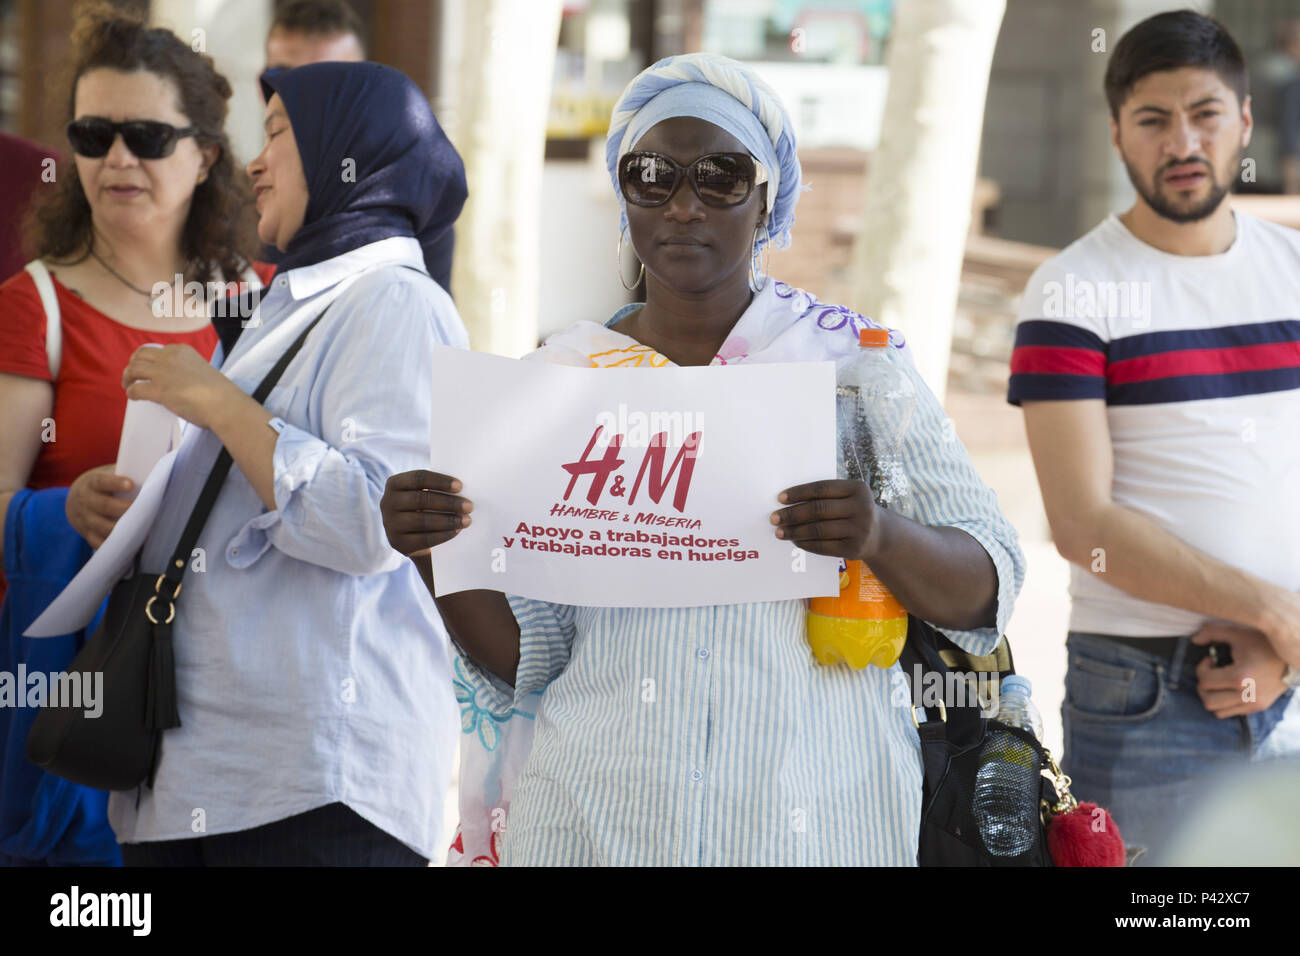 Madrid, Spain. 20th June, 2018. A H&M worker on strike seen holding a  placard during the demonstration.Workers of the H&M logistic center in  Madrid has gone on strike and took to the